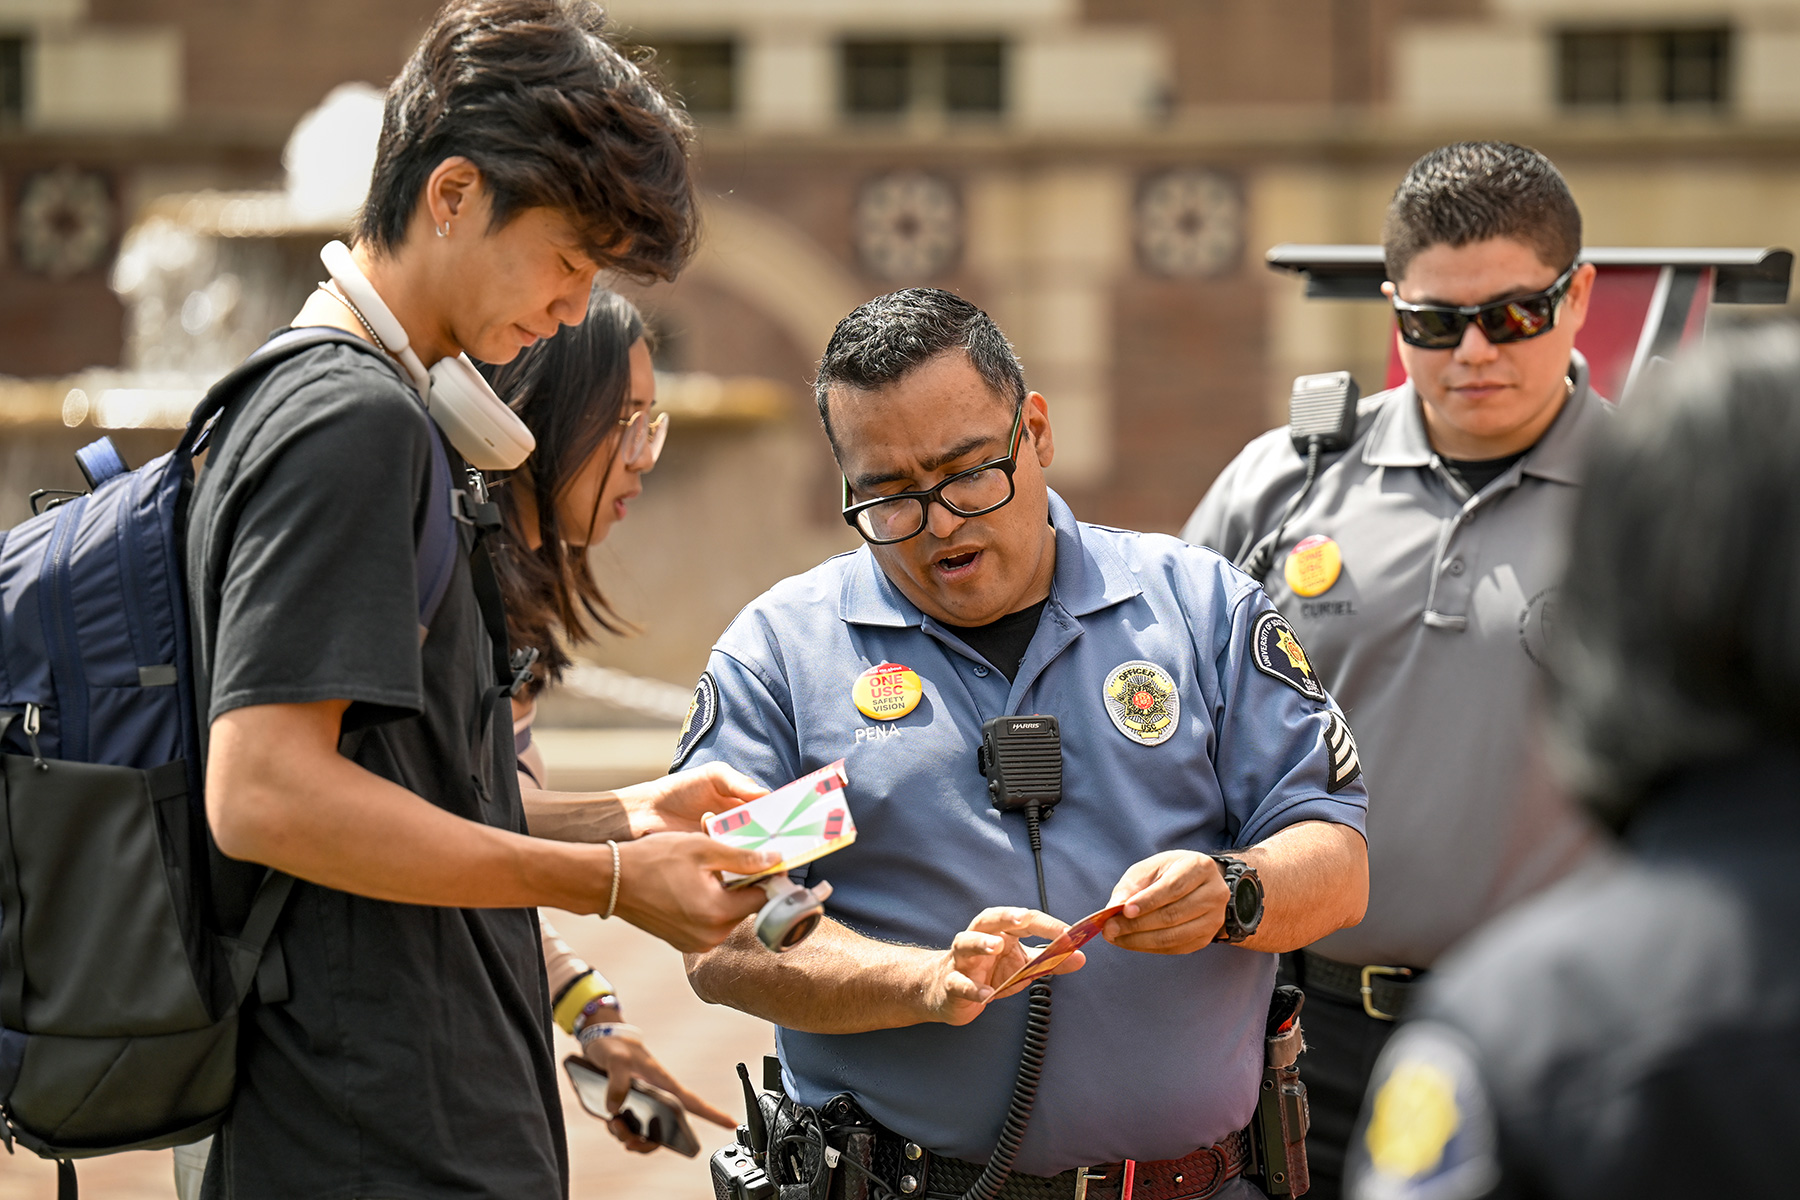 USC Safety Days: Student Kyle Kim talks with DPS Community Service Officer Adrian Pen?a